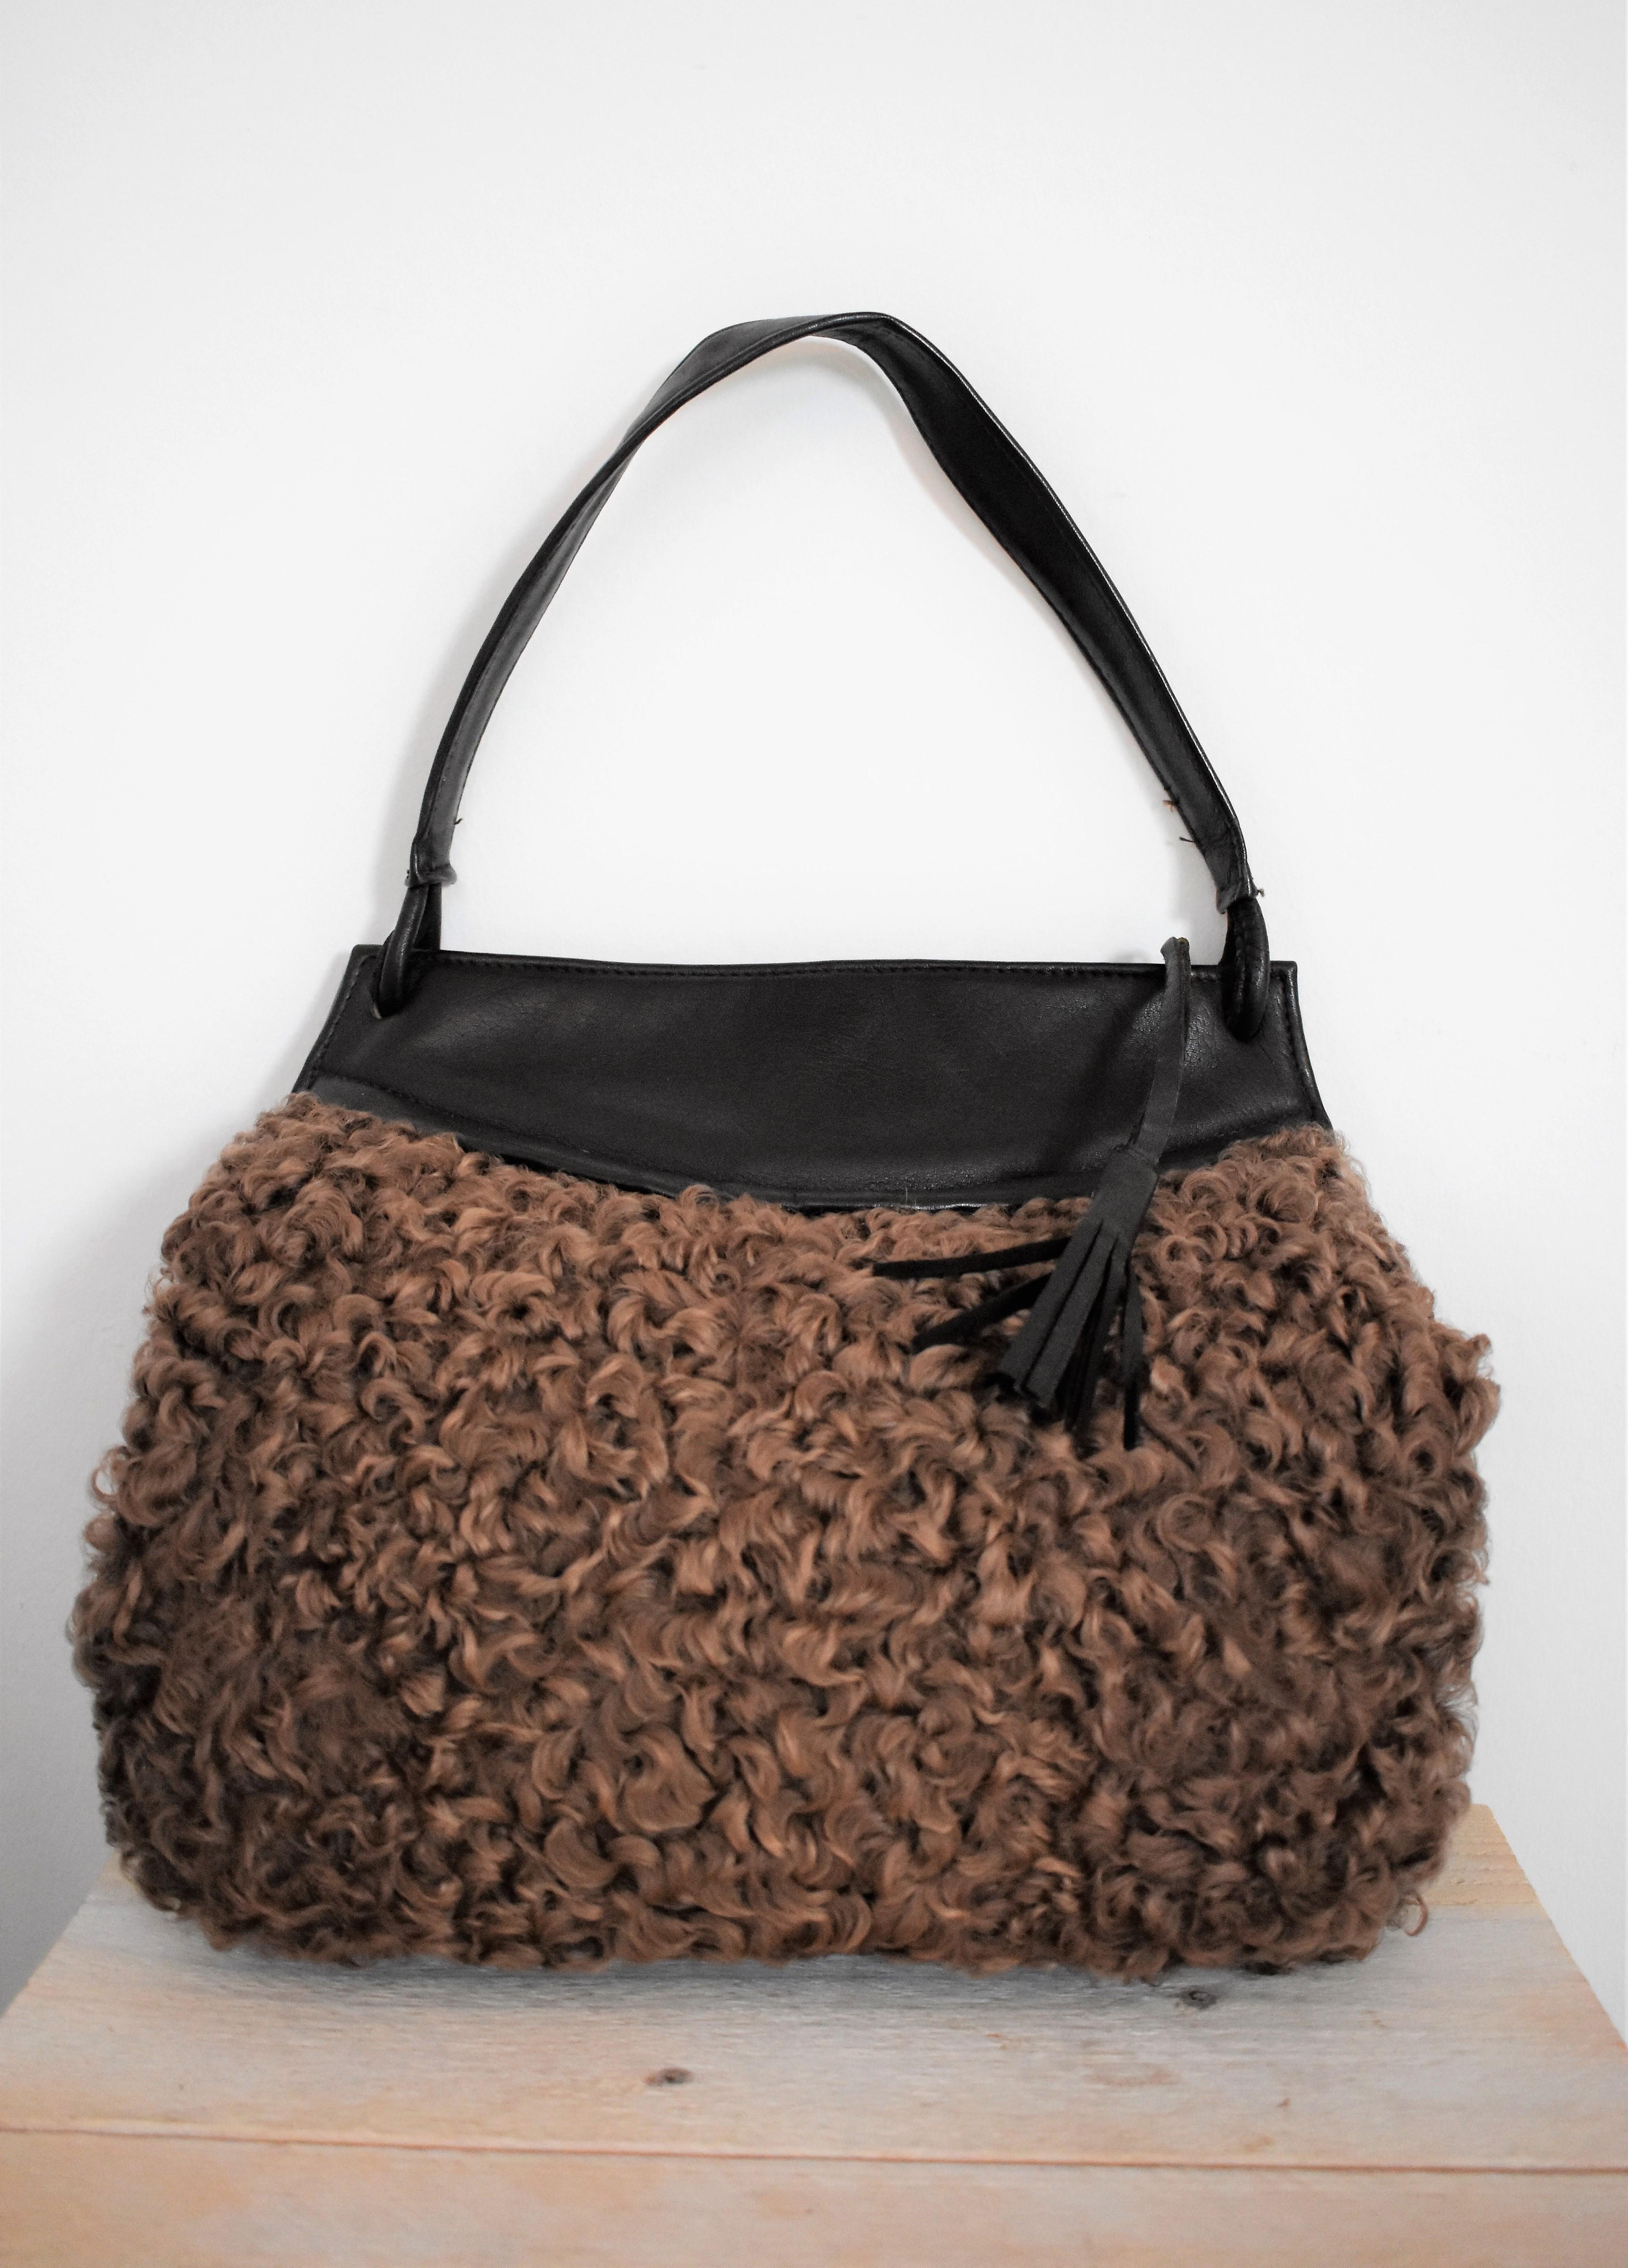 This handbag is made from very soft curly lamb fur and leather. It has a hole inside, lined with soft fabric, which can be used to keep your hands warm. it was made in crica 1950 and it is in very good condition. 